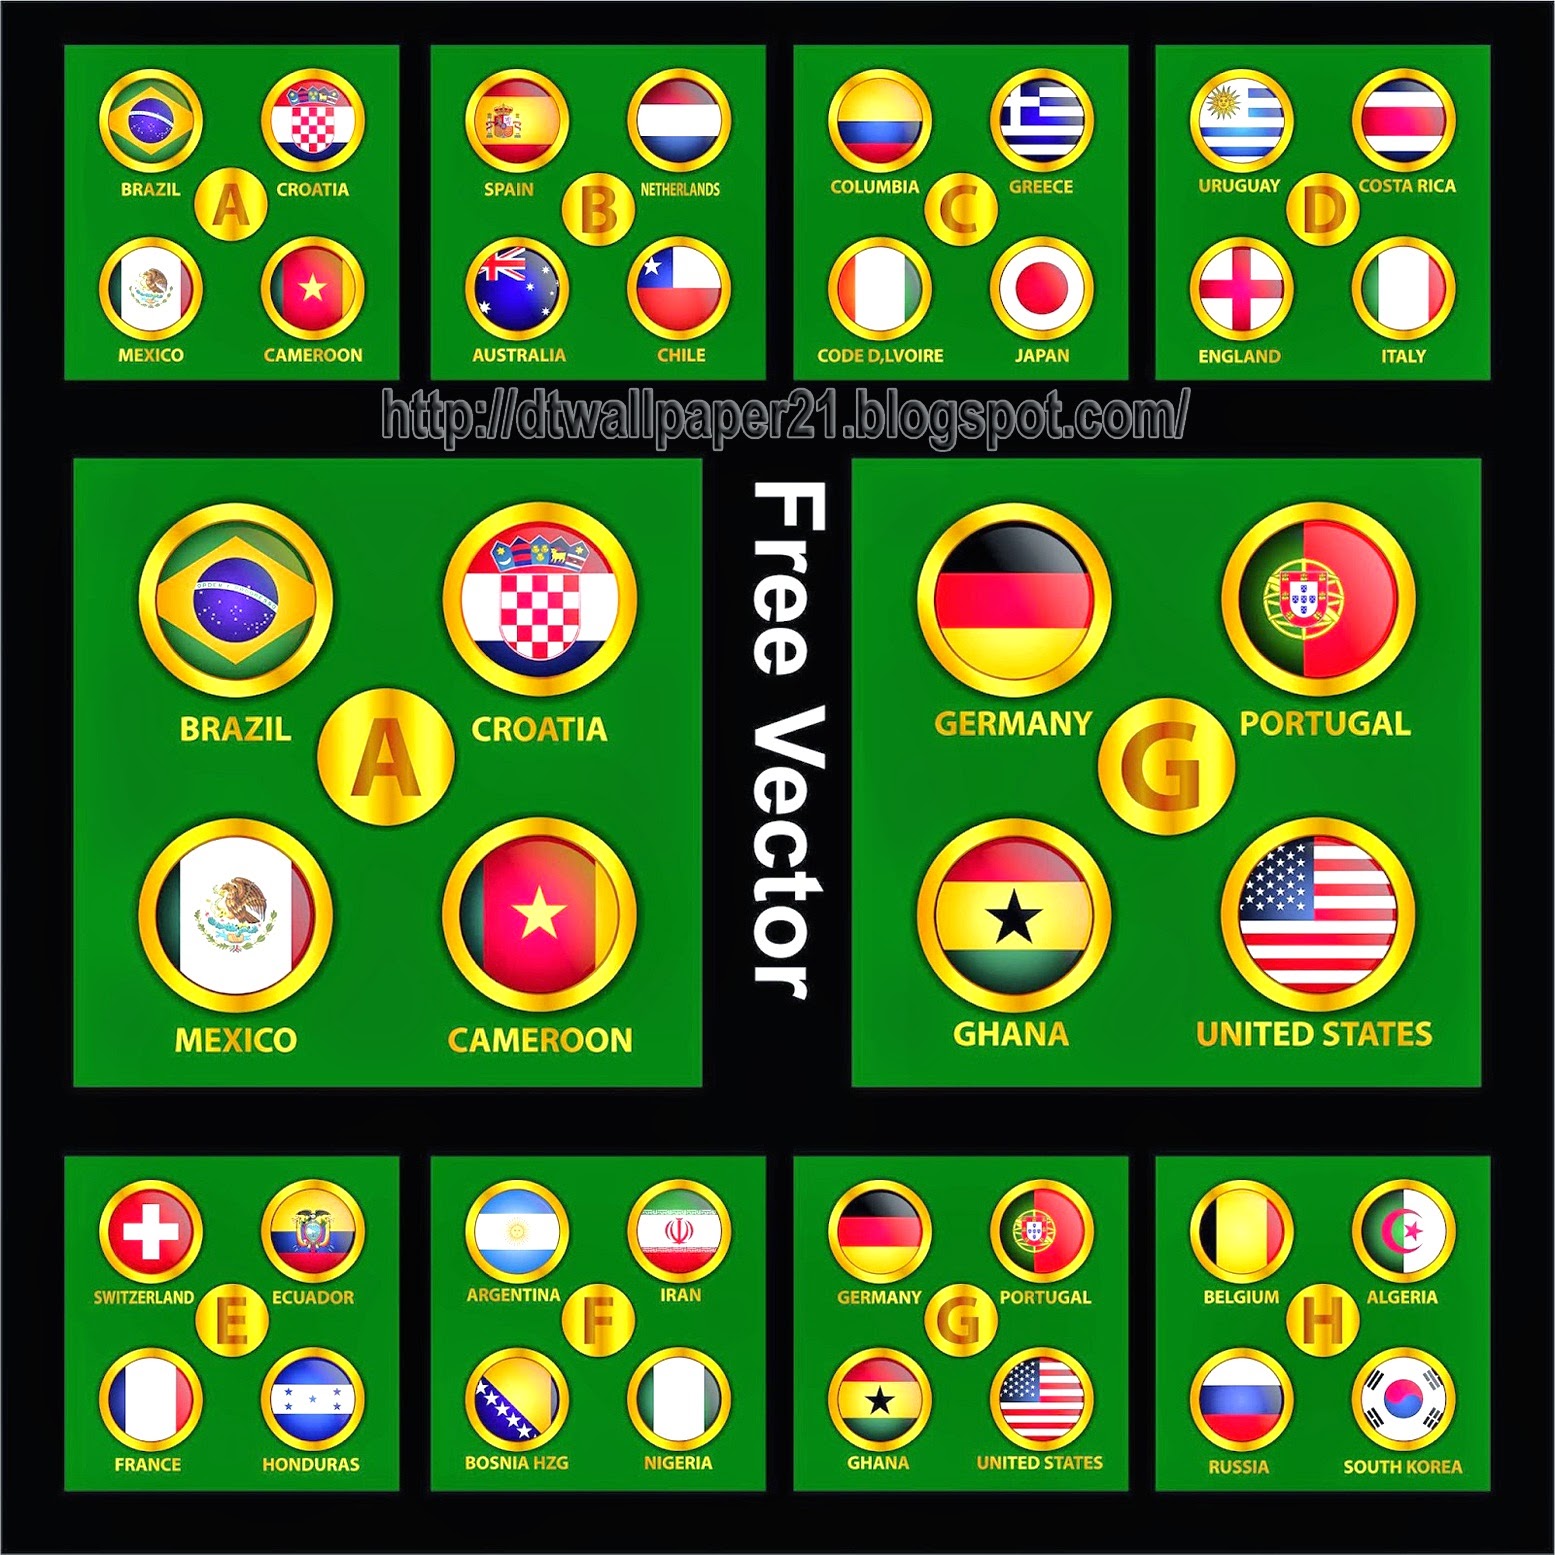 fifa, fifa world cup schedule, football, football games, others, world    football games background vector